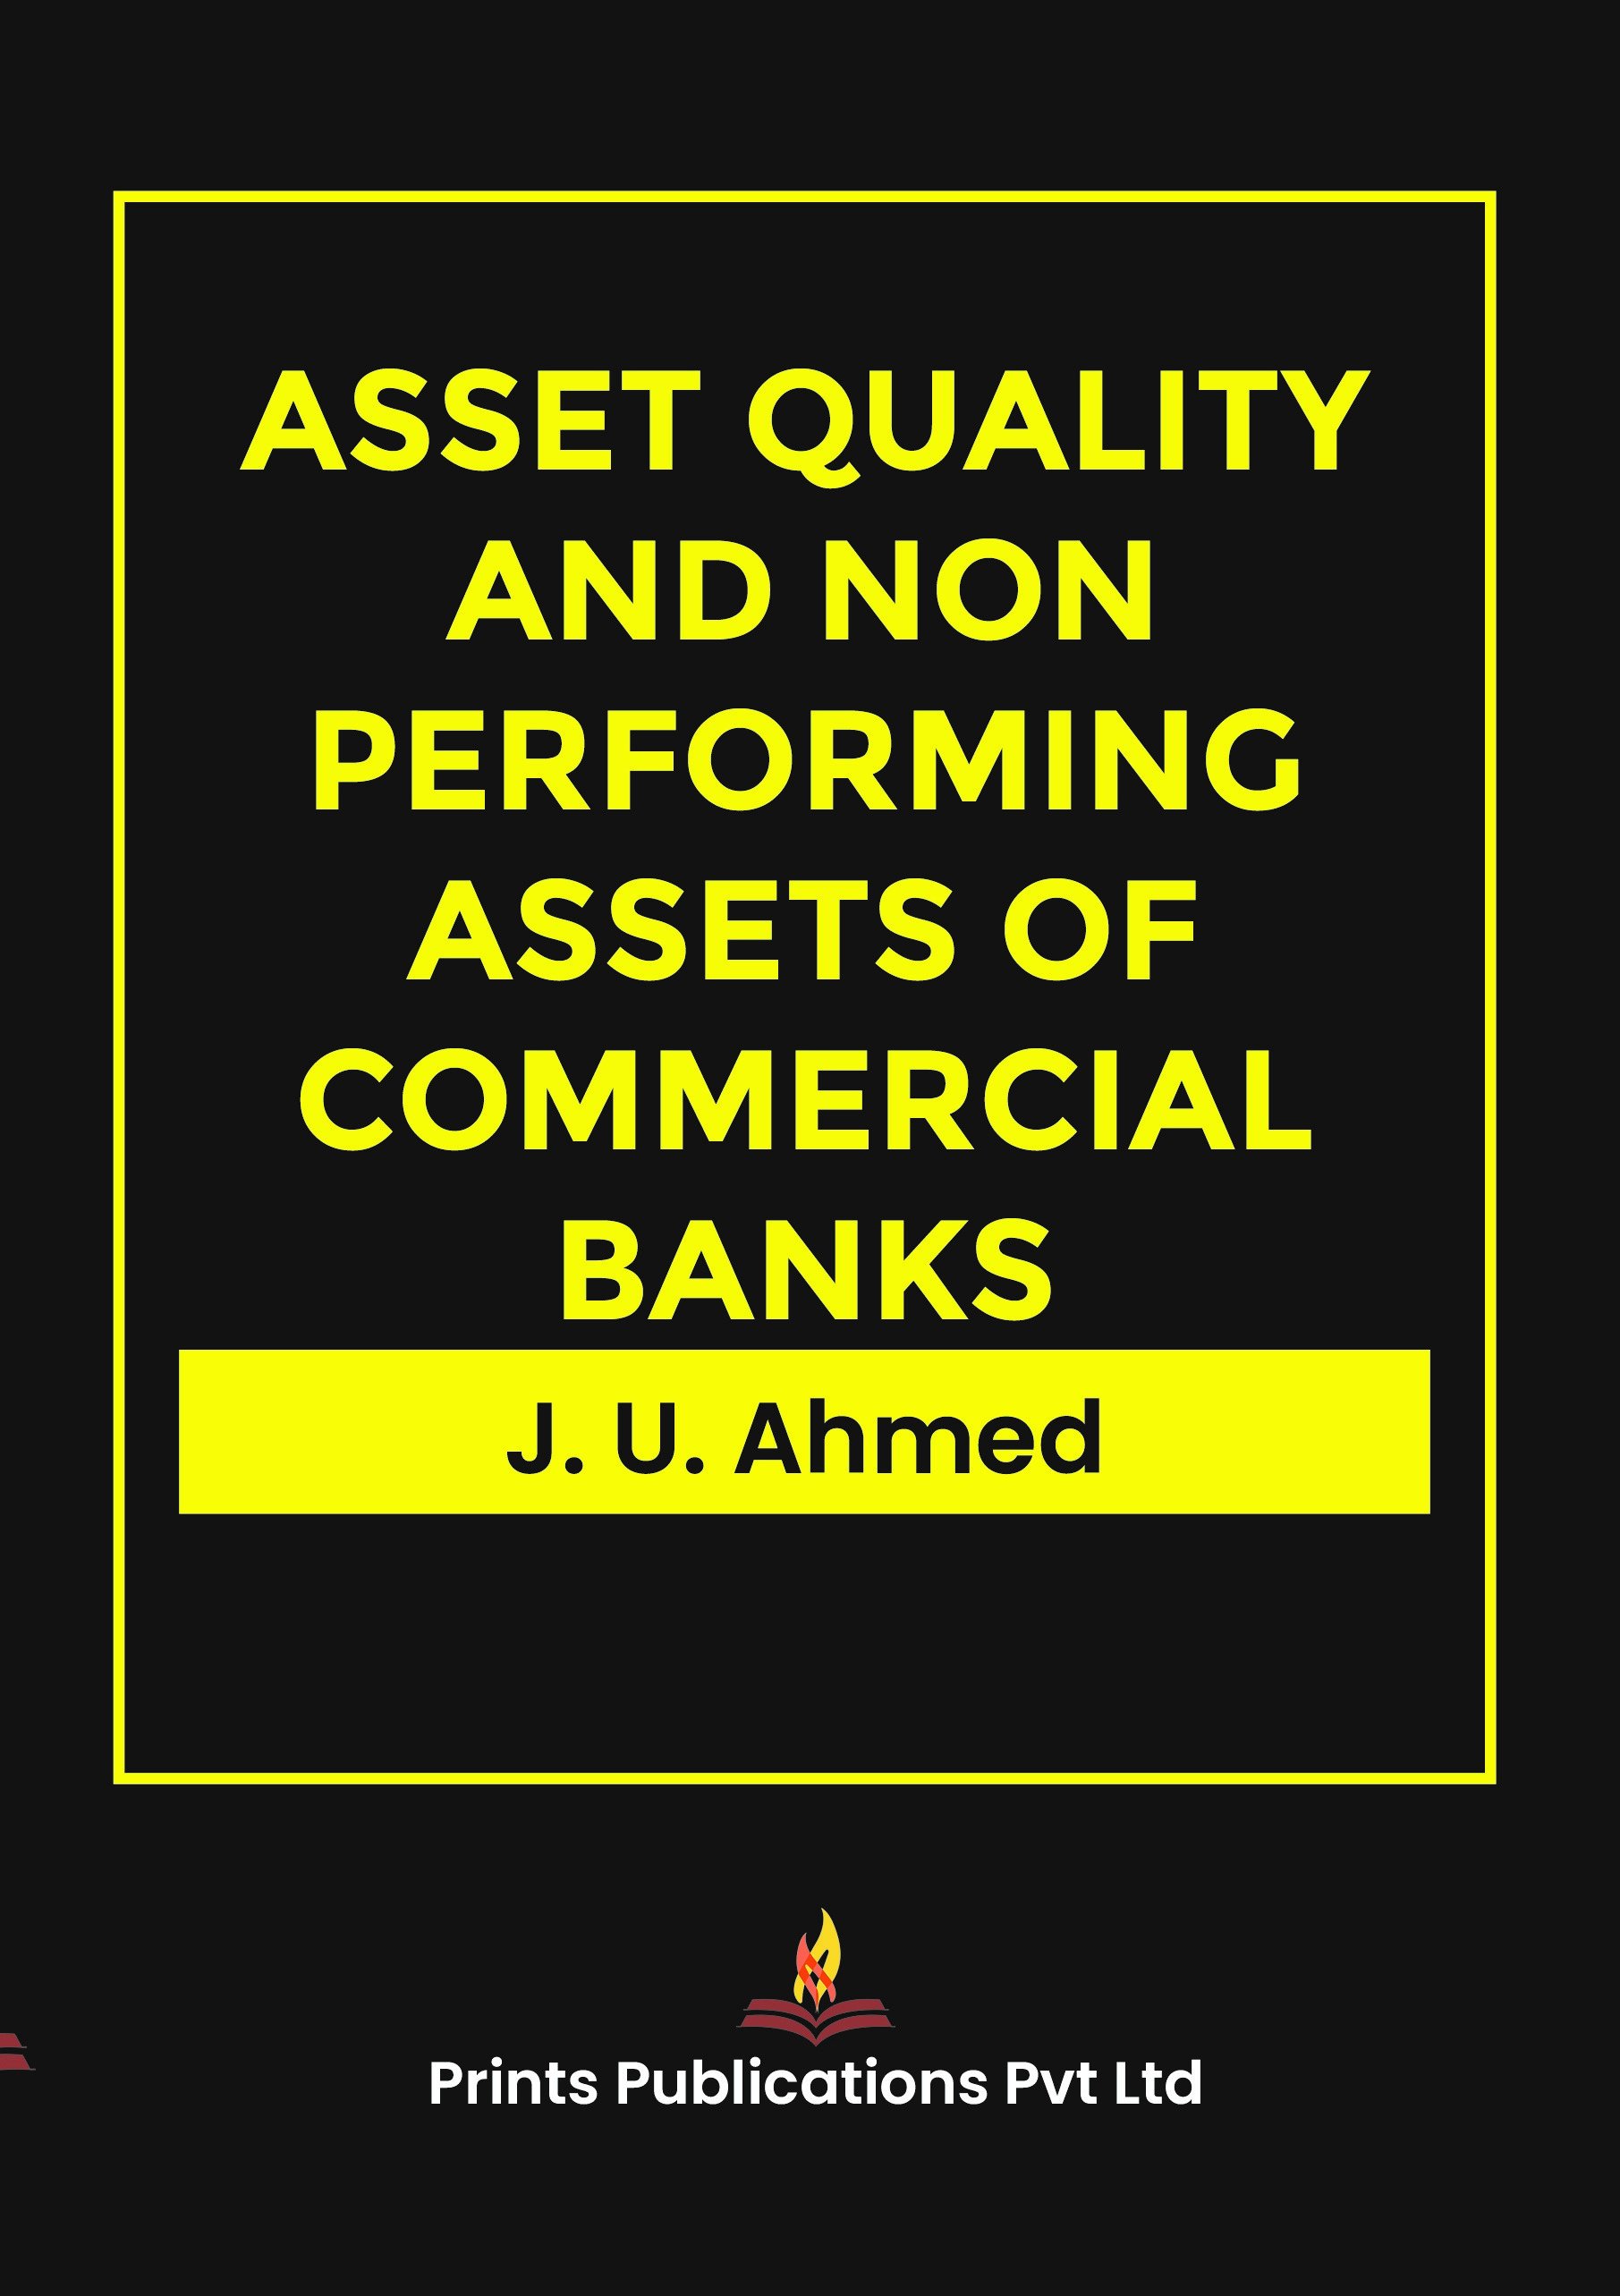 ASSET QUALITY AND NON PERFORMING ASSETS OF COMMERCIAL BANKS 